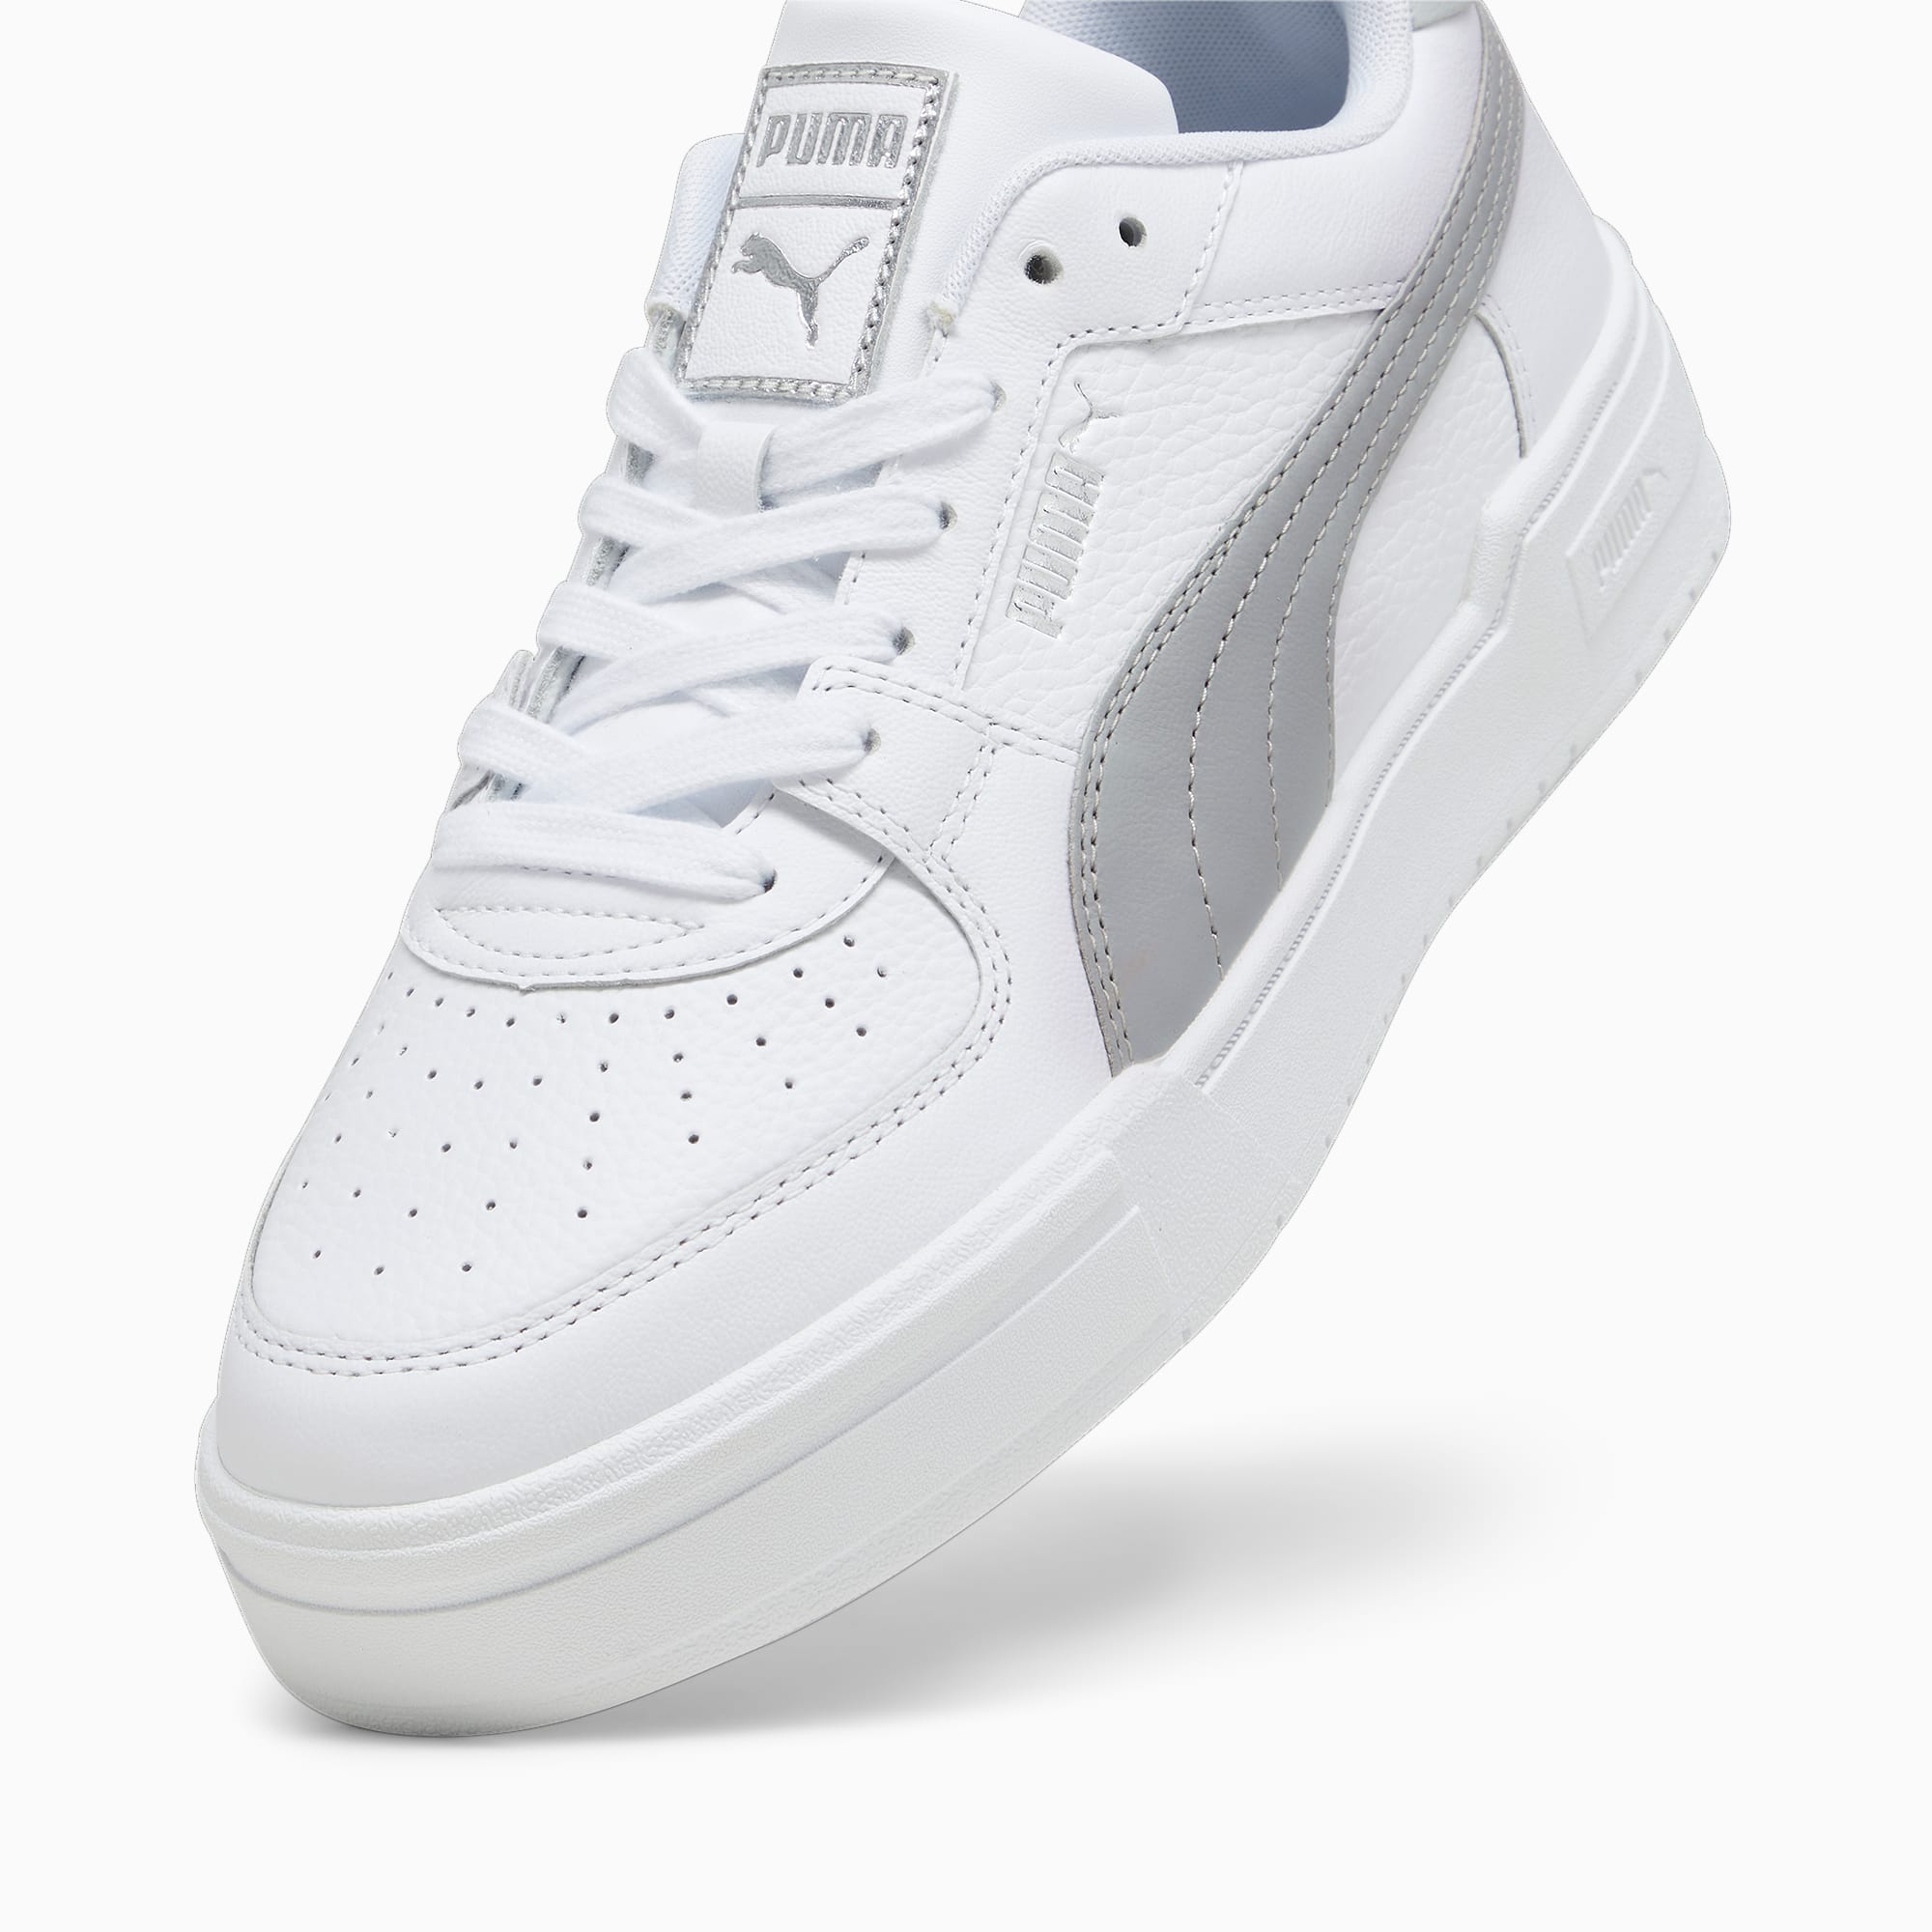 Women's PUMA Ca Pro Classic Trainers, White/Cool Light Grey, Size 52, Shoes